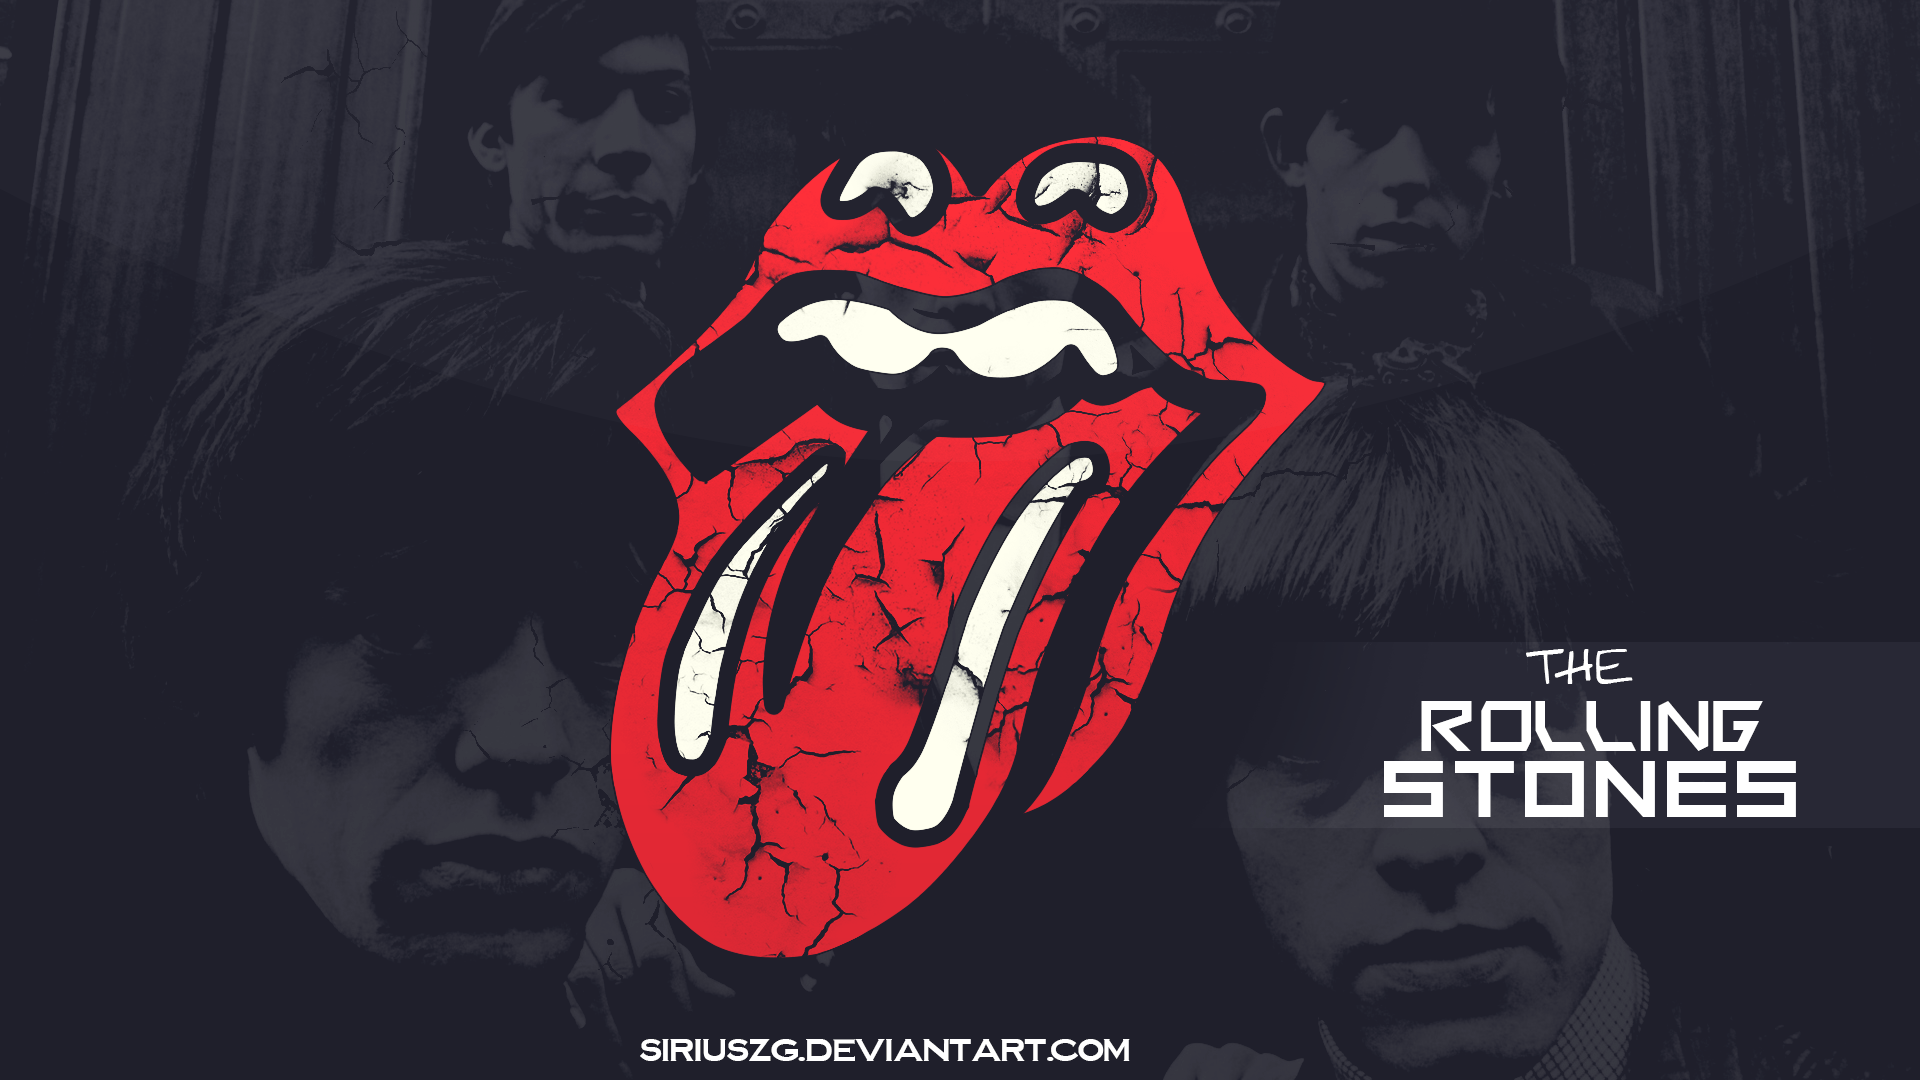 The Rolling Stones by SiriusZG